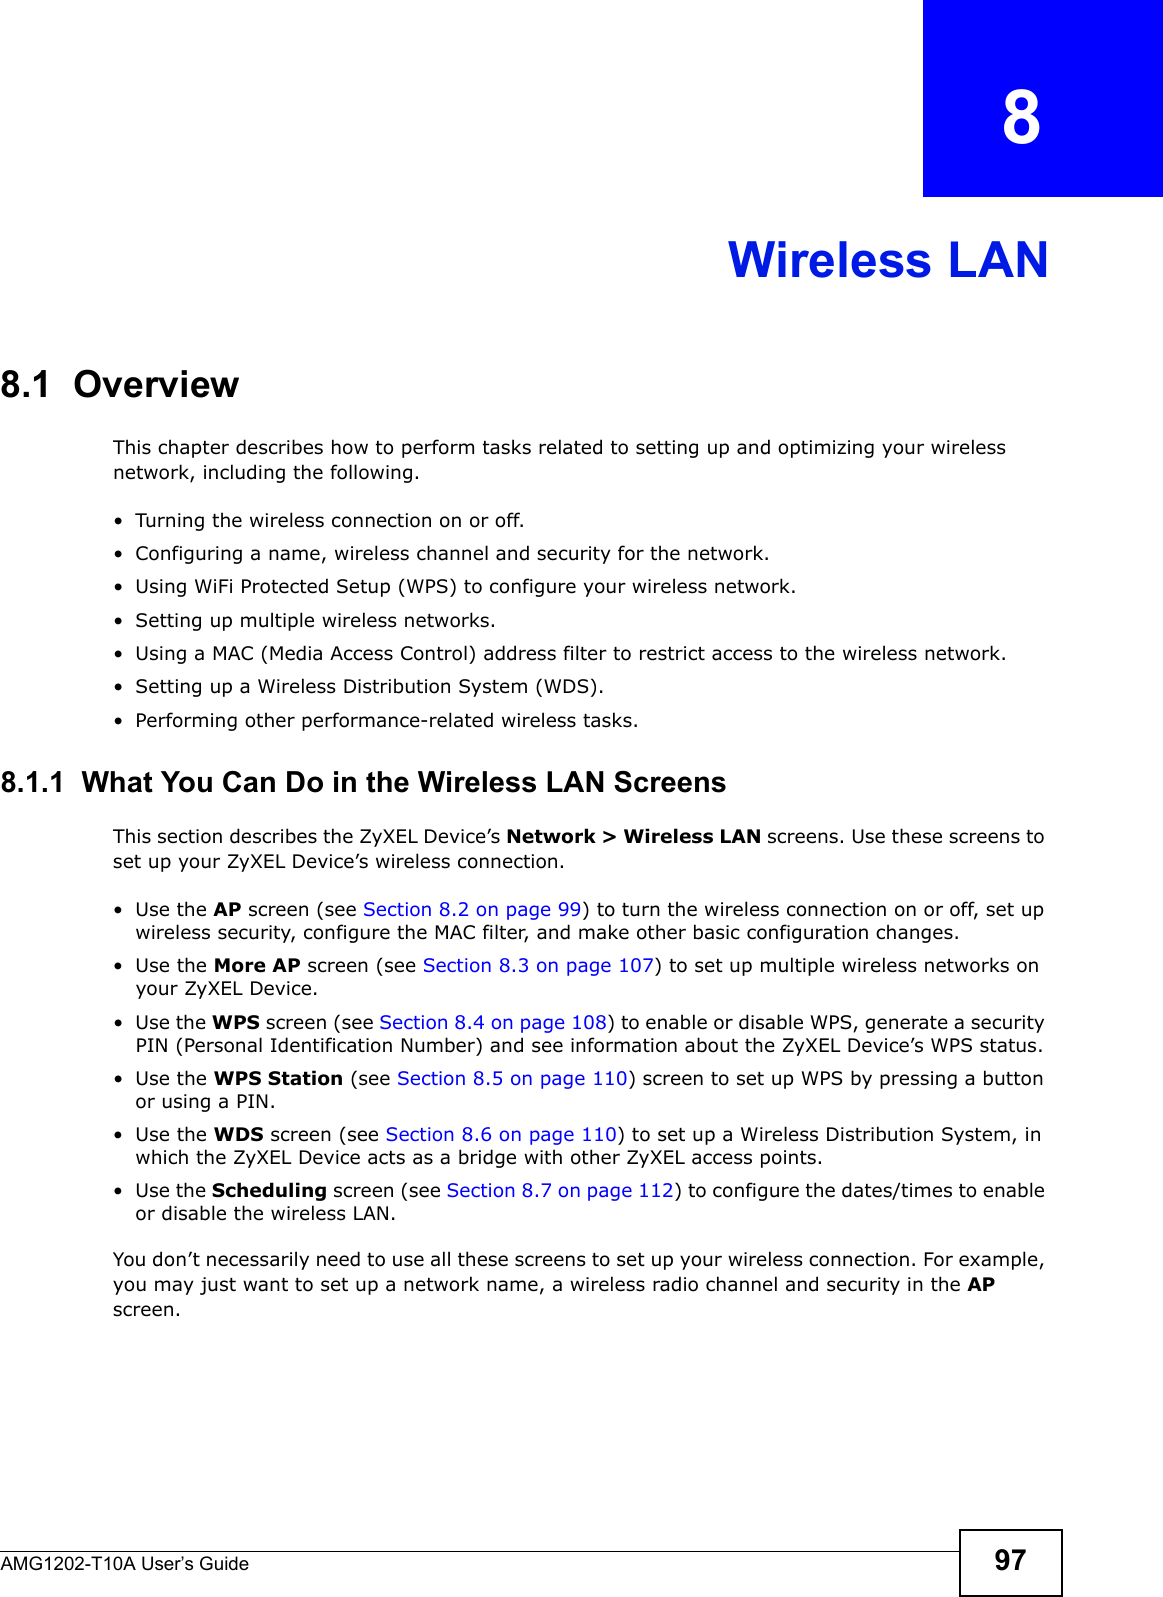 AMG1202-T10A User’s Guide 97CHAPTER   8Wireless LAN8.1  Overview This chapter describes how to perform tasks related to setting up and optimizing your wireless network, including the following.• Turning the wireless connection on or off.• Configuring a name, wireless channel and security for the network.• Using WiFi Protected Setup (WPS) to configure your wireless network.• Setting up multiple wireless networks.• Using a MAC (Media Access Control) address filter to restrict access to the wireless network.• Setting up a Wireless Distribution System (WDS).• Performing other performance-related wireless tasks.8.1.1  What You Can Do in the Wireless LAN ScreensThis section describes the ZyXEL Device’s Network &gt; Wireless LAN screens. Use these screens to set up your ZyXEL Device’s wireless connection.•Use the AP screen (see Section 8.2 on page 99) to turn the wireless connection on or off, set up wireless security, configure the MAC filter, and make other basic configuration changes.•Use the More AP screen (see Section 8.3 on page 107) to set up multiple wireless networks on your ZyXEL Device.•Use the WPS screen (see Section 8.4 on page 108) to enable or disable WPS, generate a security PIN (Personal Identification Number) and see information about the ZyXEL Device’s WPS status.•Use the WPS Station (see Section 8.5 on page 110) screen to set up WPS by pressing a button or using a PIN.•Use the WDS screen (see Section 8.6 on page 110) to set up a Wireless Distribution System, in which the ZyXEL Device acts as a bridge with other ZyXEL access points.•Use the Scheduling screen (see Section 8.7 on page 112) to configure the dates/times to enable or disable the wireless LAN.You don’t necessarily need to use all these screens to set up your wireless connection. For example, you may just want to set up a network name, a wireless radio channel and security in the AP screen.